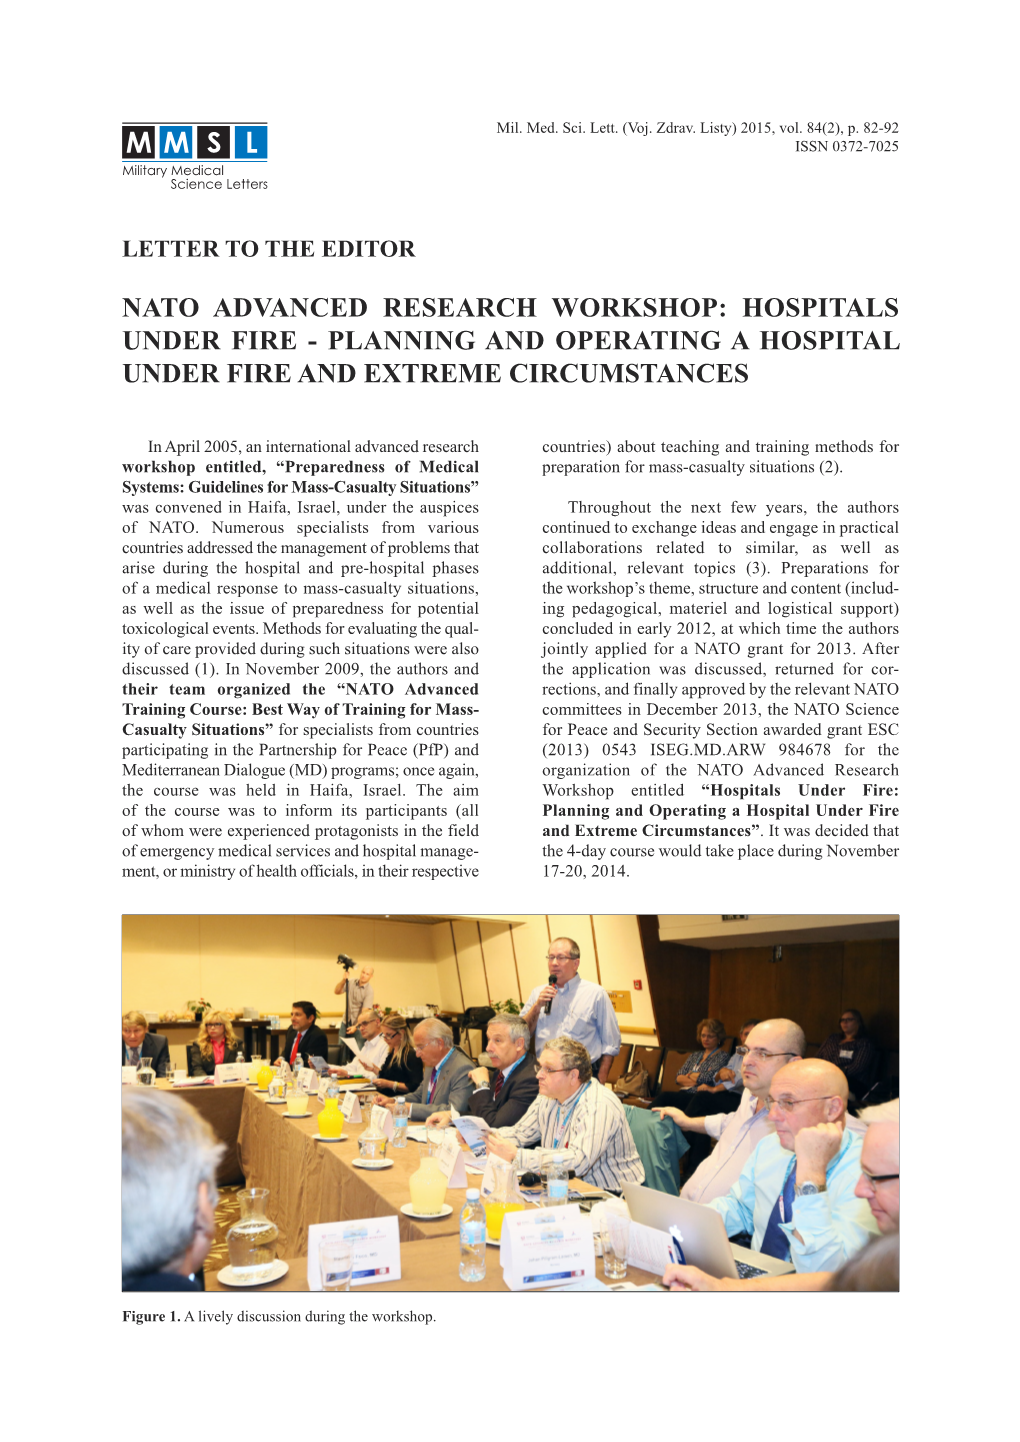 Nato Advanced Research Workshop: Hospitals Under Fire - Planning and Operating a Hospital Under Fire and Extreme Circumstances